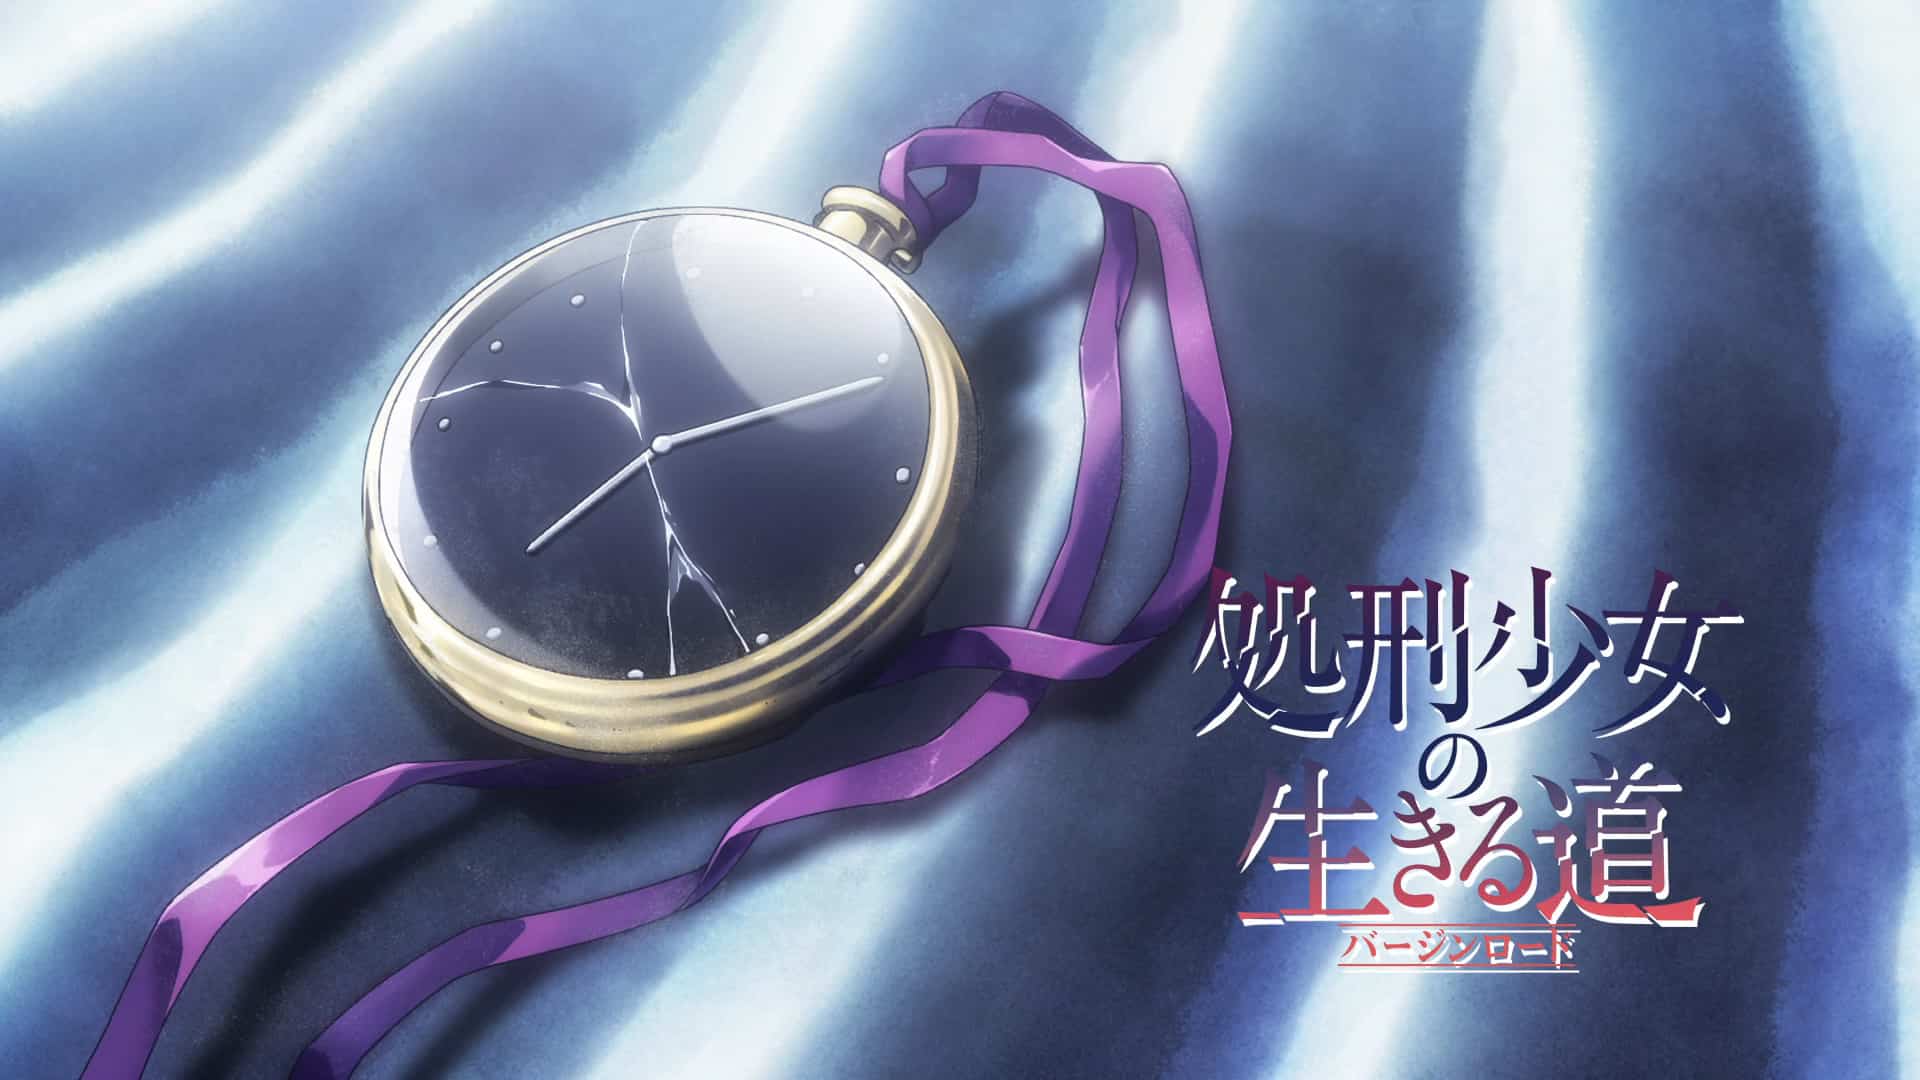 Mid-Title Card featuring Menue's pocket watch